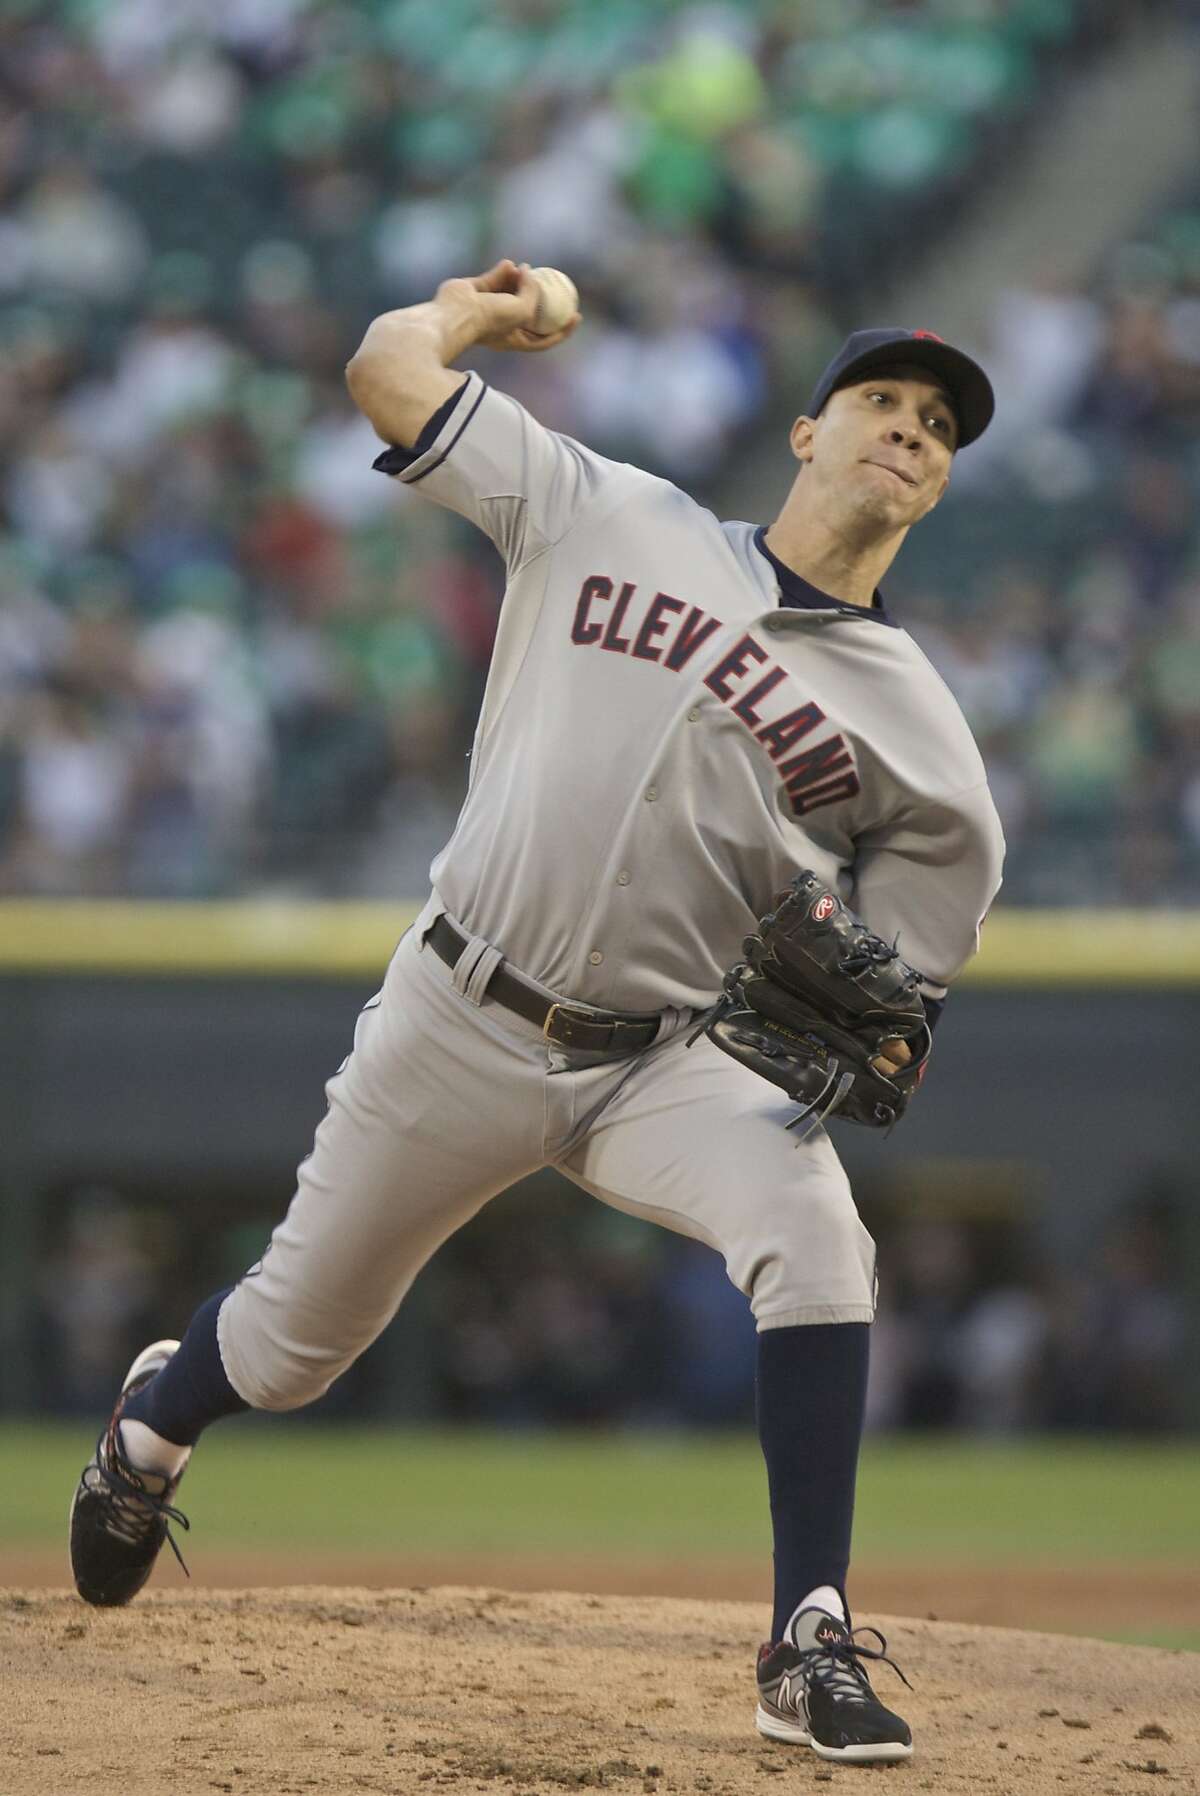 CHICAGO, IL - SEPTEMBER 14: Ubaldo Jimenez #30 of the Cleveland Indians throws to the Chicago White Sox during the first inning of their MLB game at U.S. Cellular Field on September 14, 2013 in Chicago, Illinois. (Photo by John Gress/Getty Images)